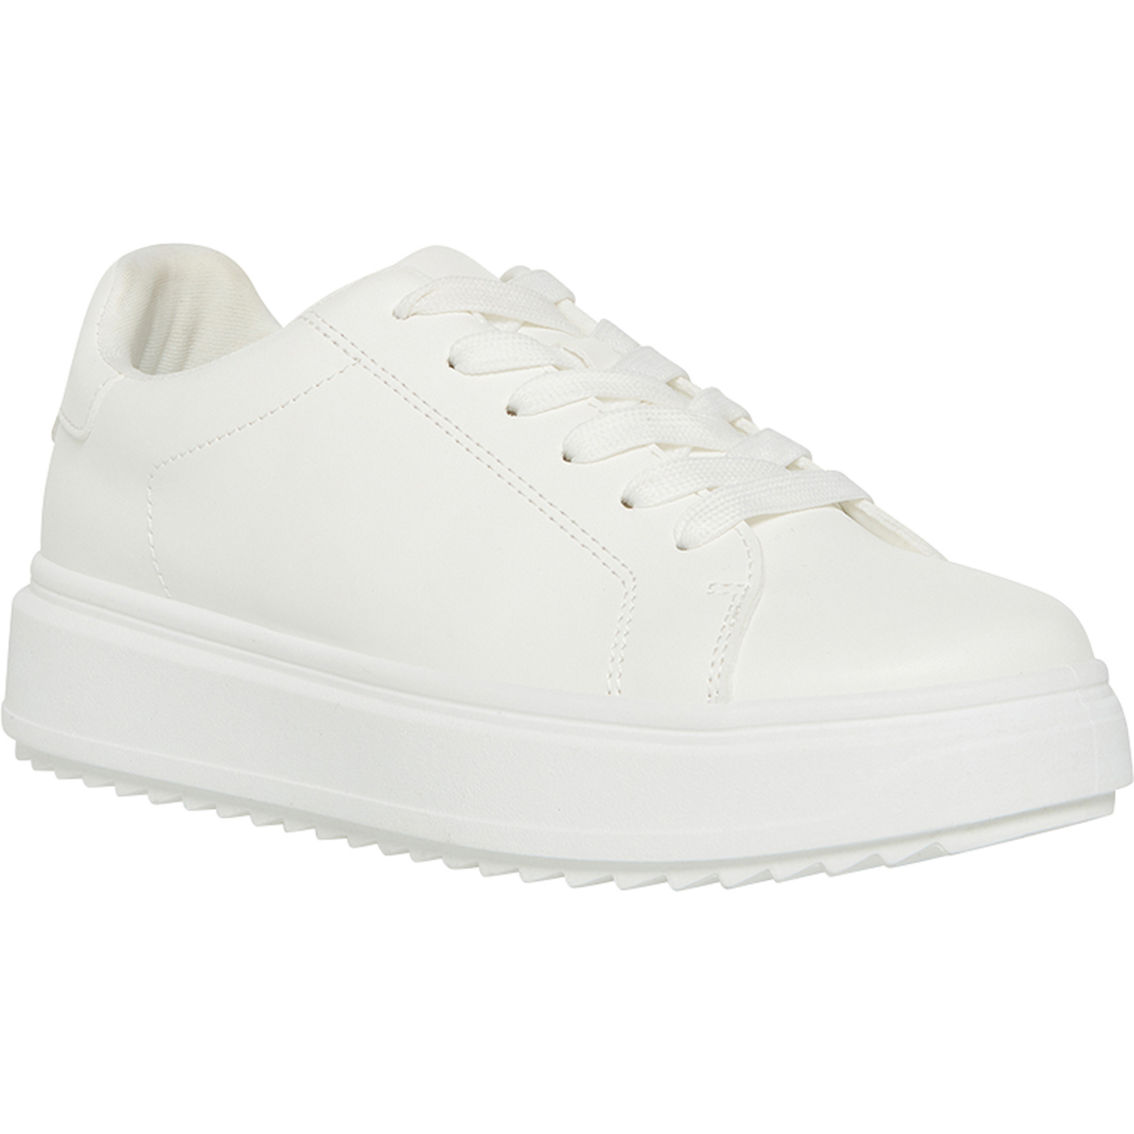 Madden Girl Women's Jeena Court Sneakers | Sneakers | Shoes | Shop The ...